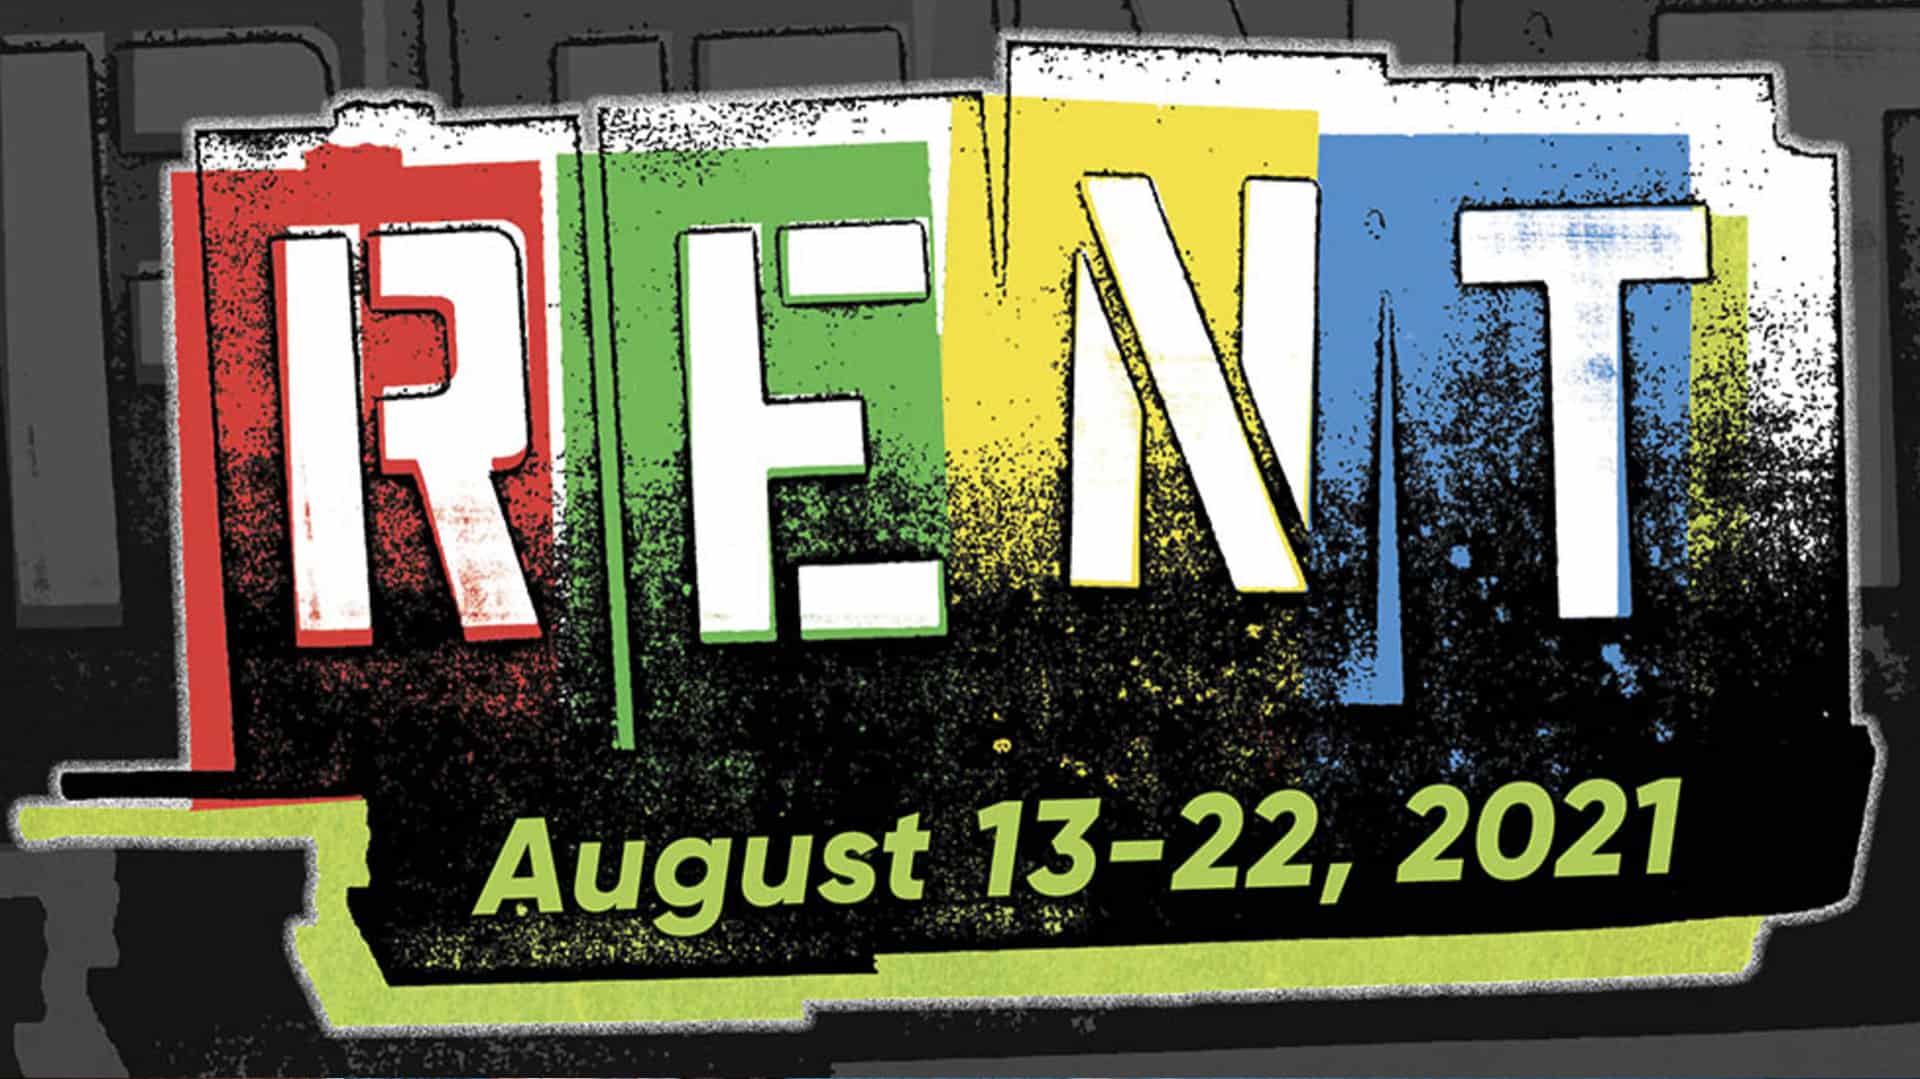 a post for Rent, which will be playing August 13-22, 2021